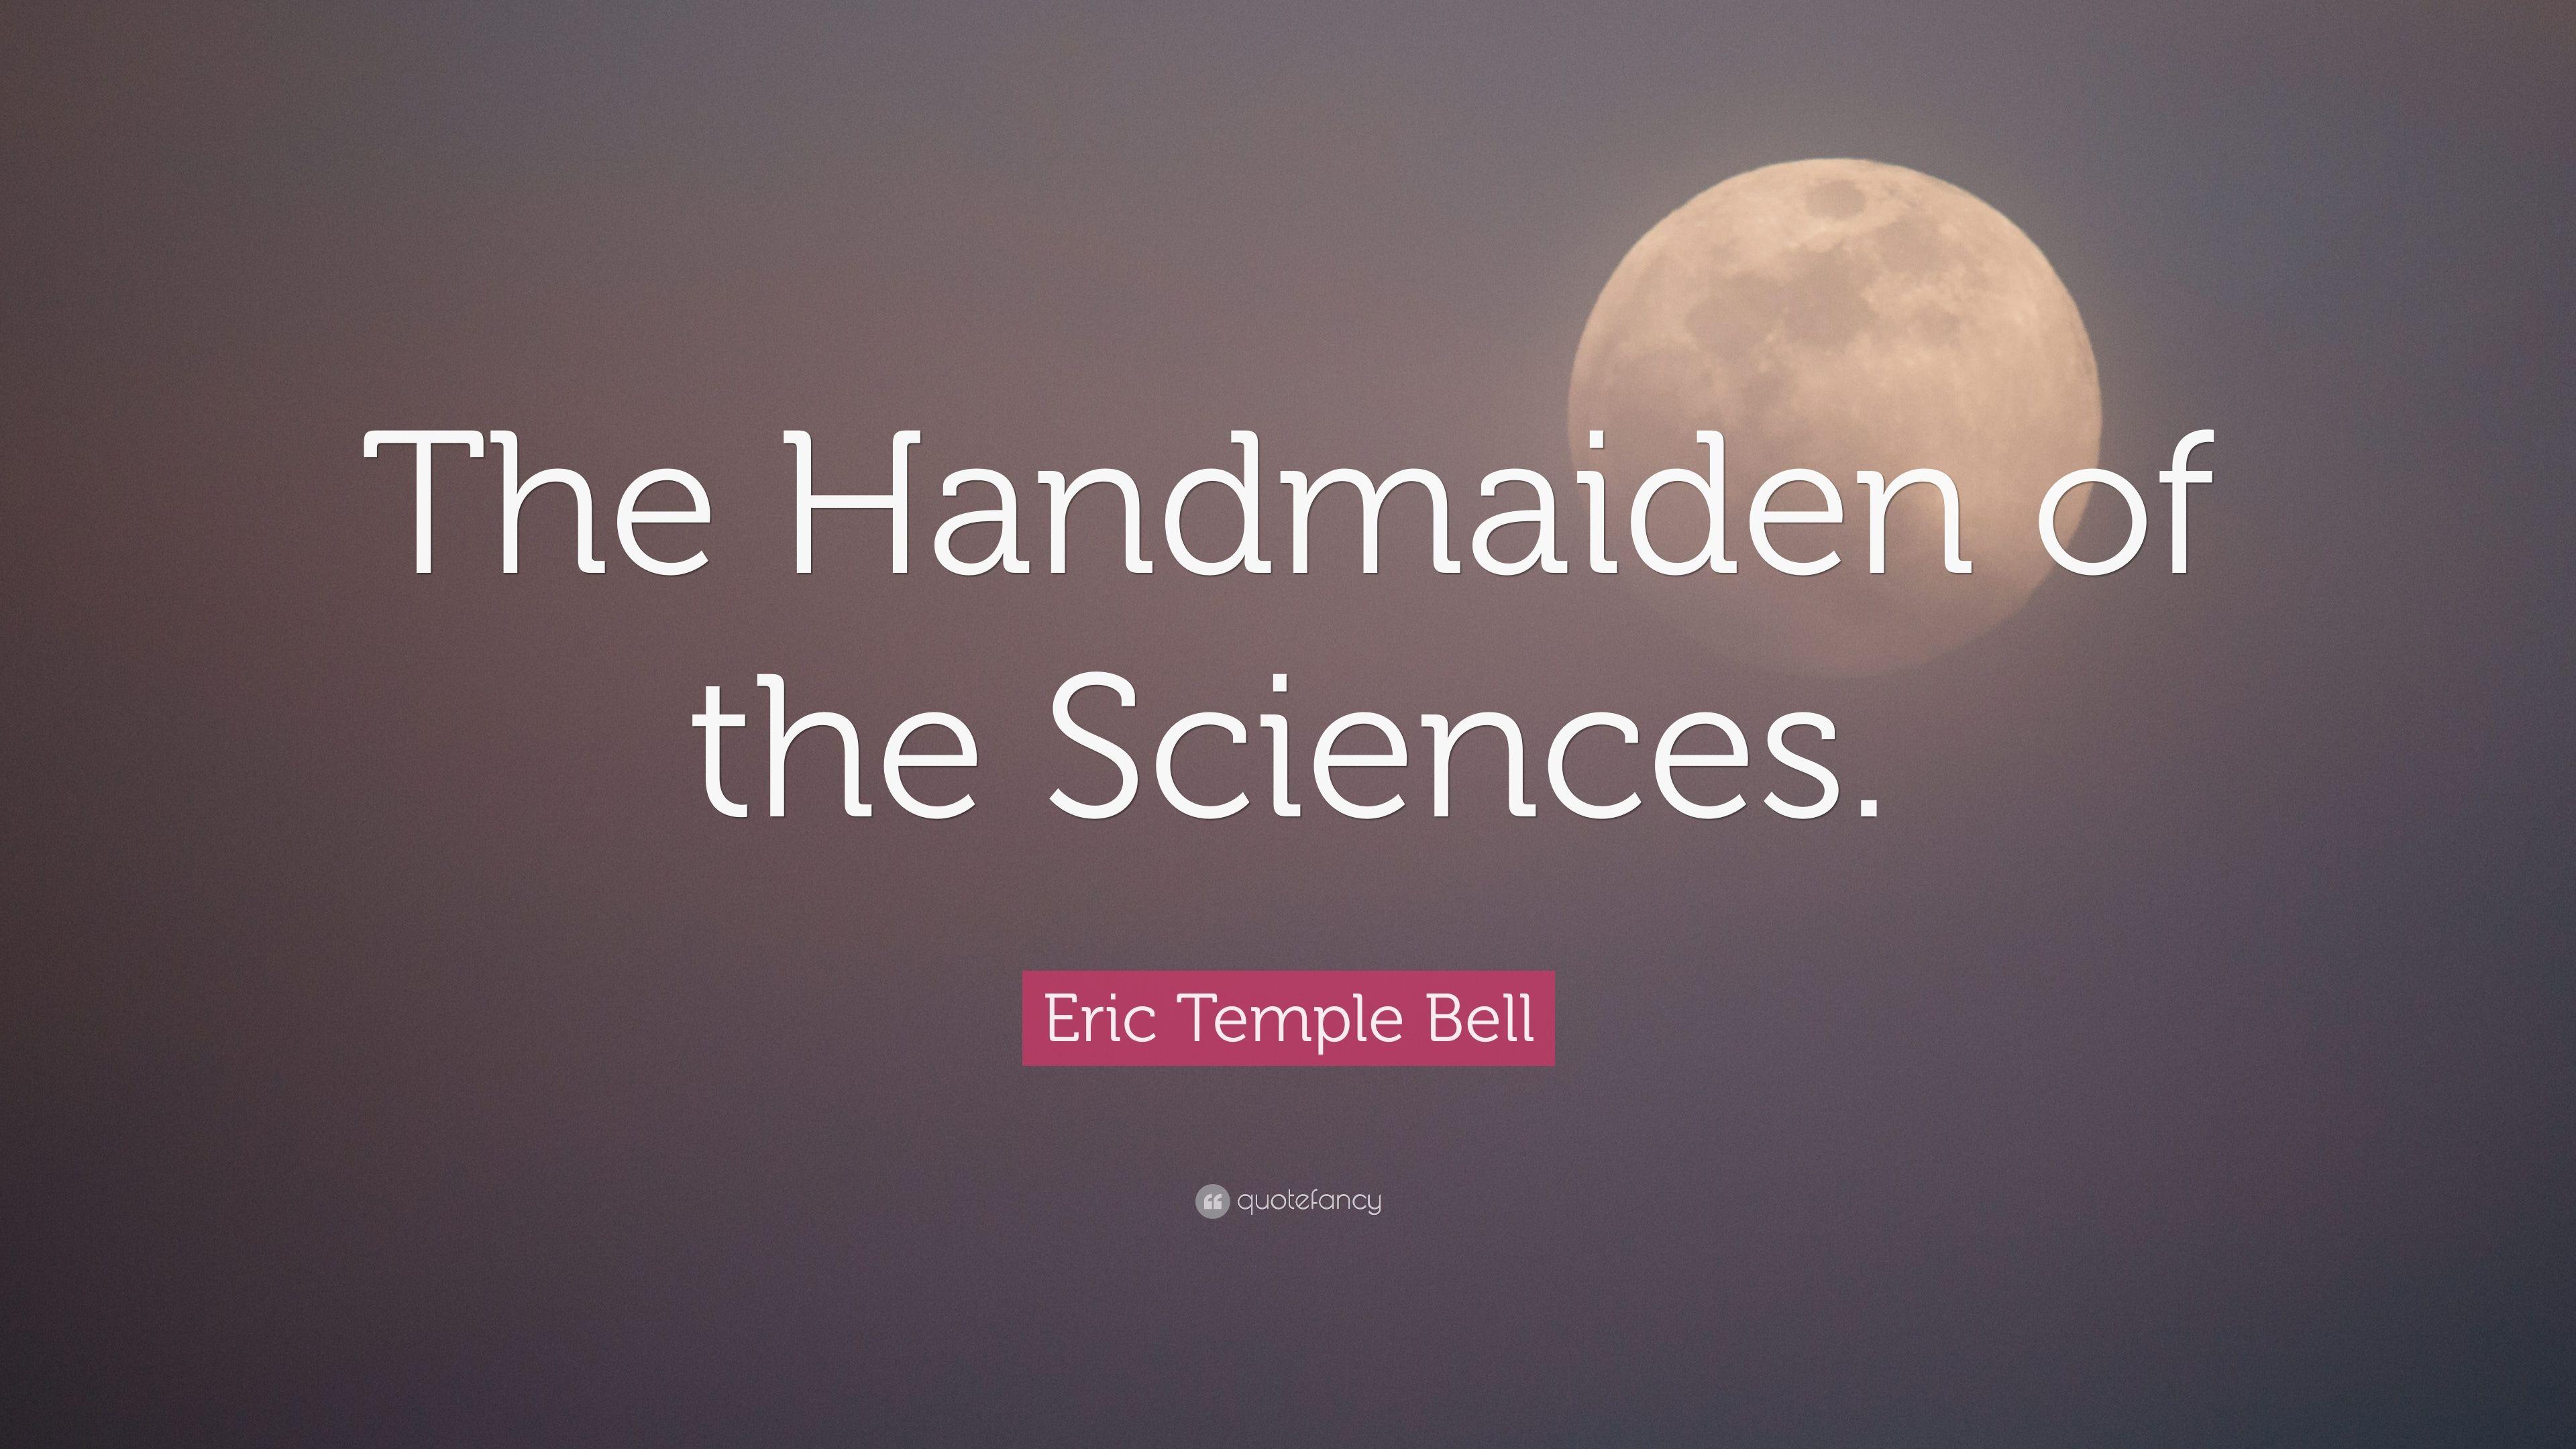 Eric Temple Bell Quote: “The Handmaiden of the Sciences.” 7